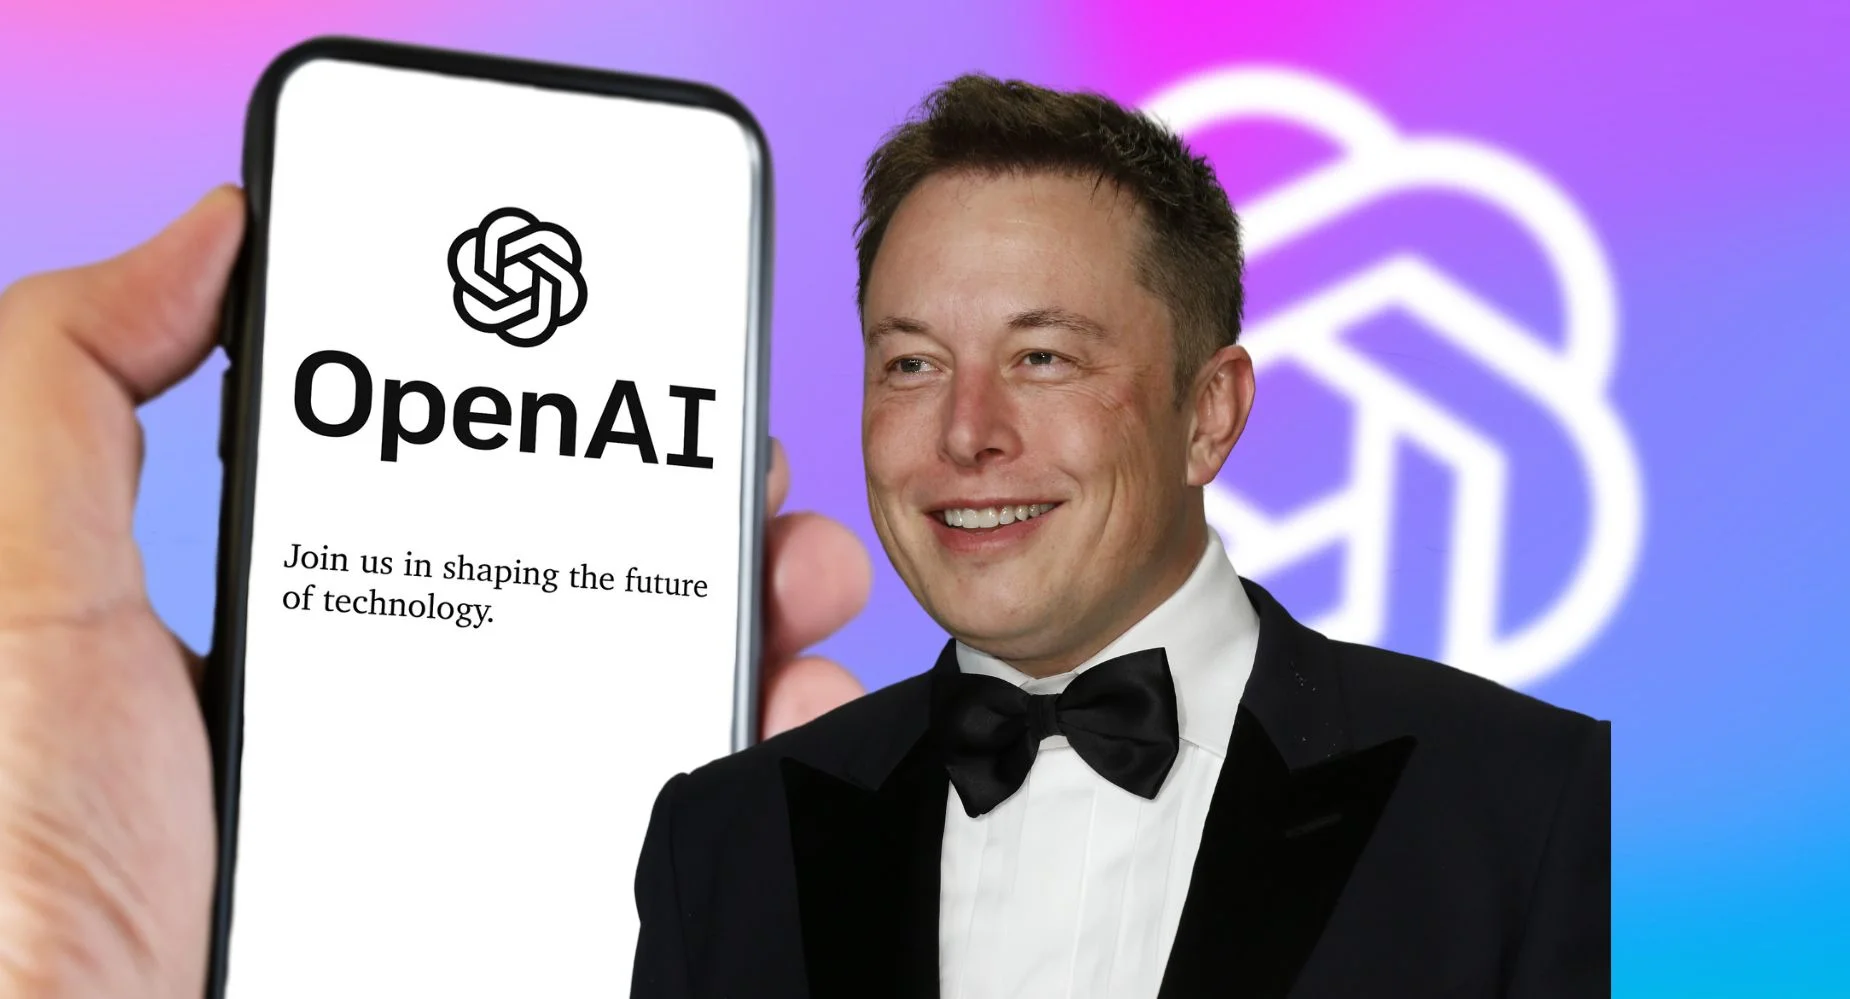 Know More How and Why Elon Musk Wanted To Make OpenAI a Part of Tesla